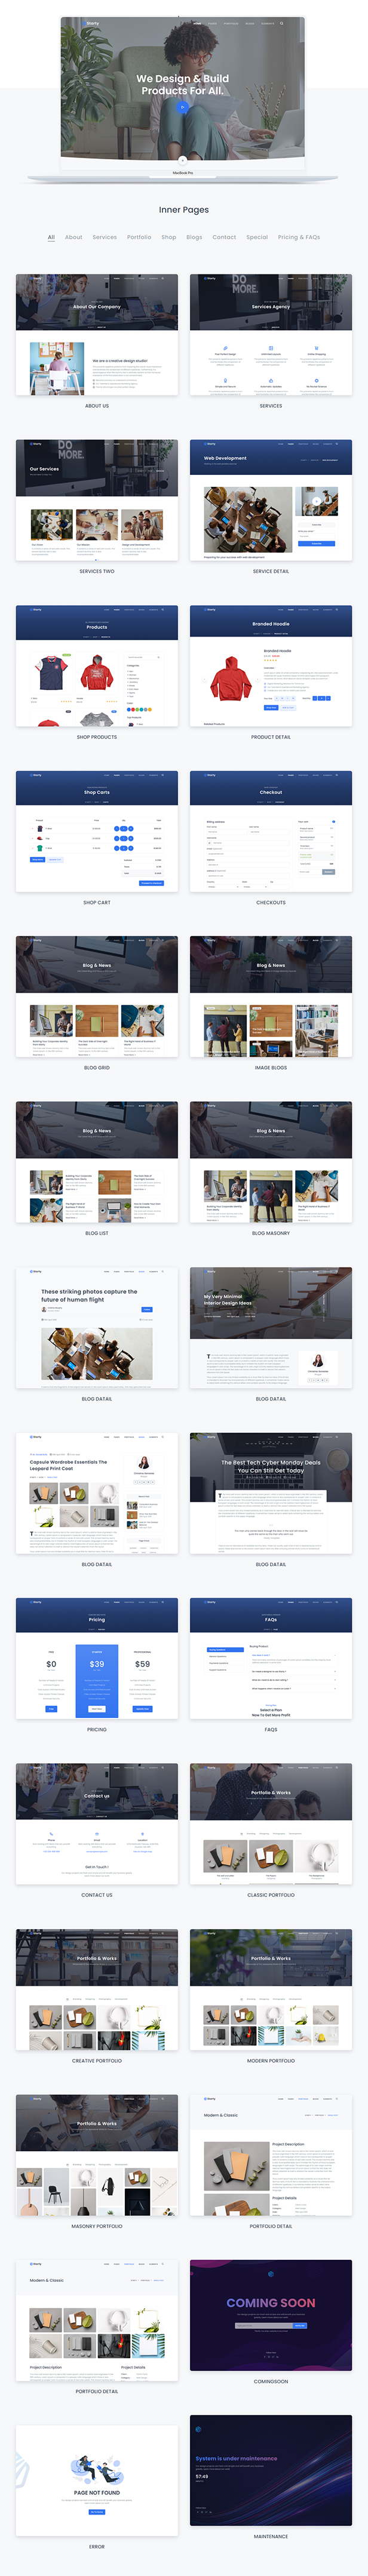 Starty - Bootstrap 5 Multipurpose Template - 4